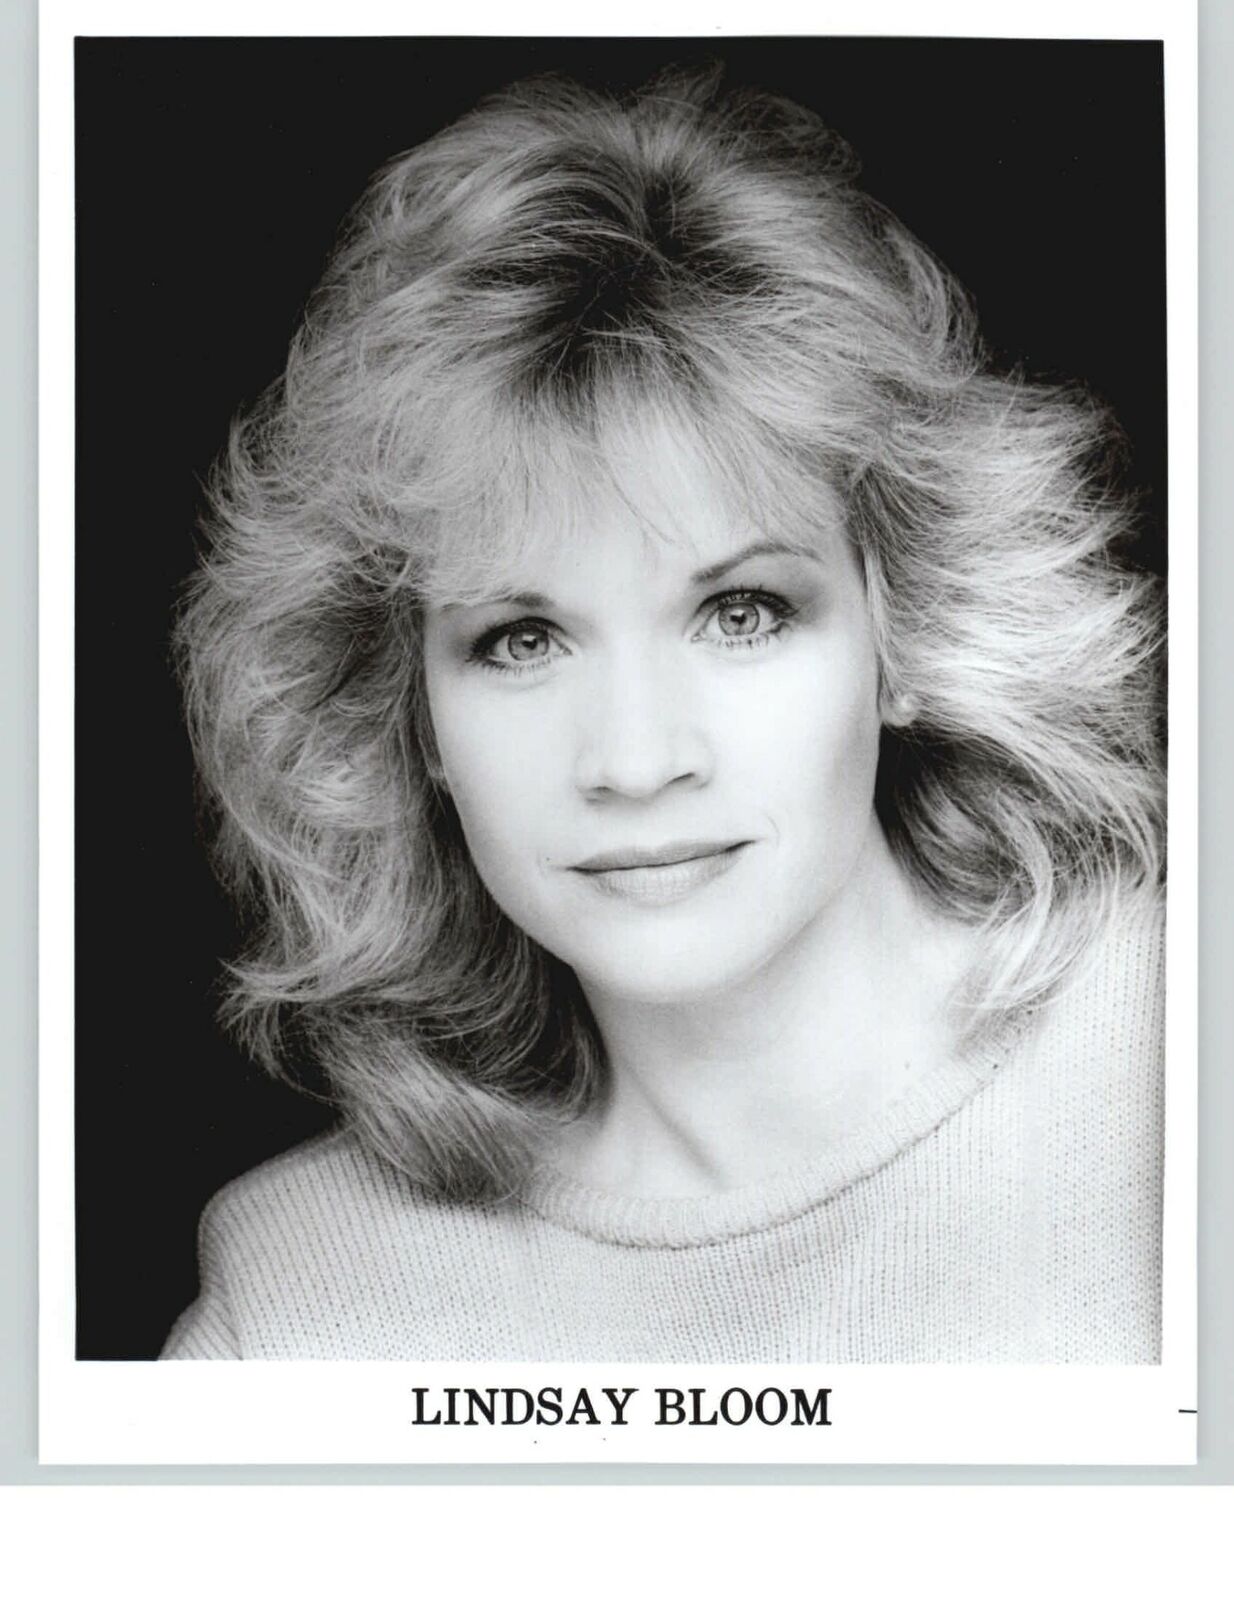 Lindsay Bloom - 8x10 Headshot Photo Poster painting - H.O.T.S